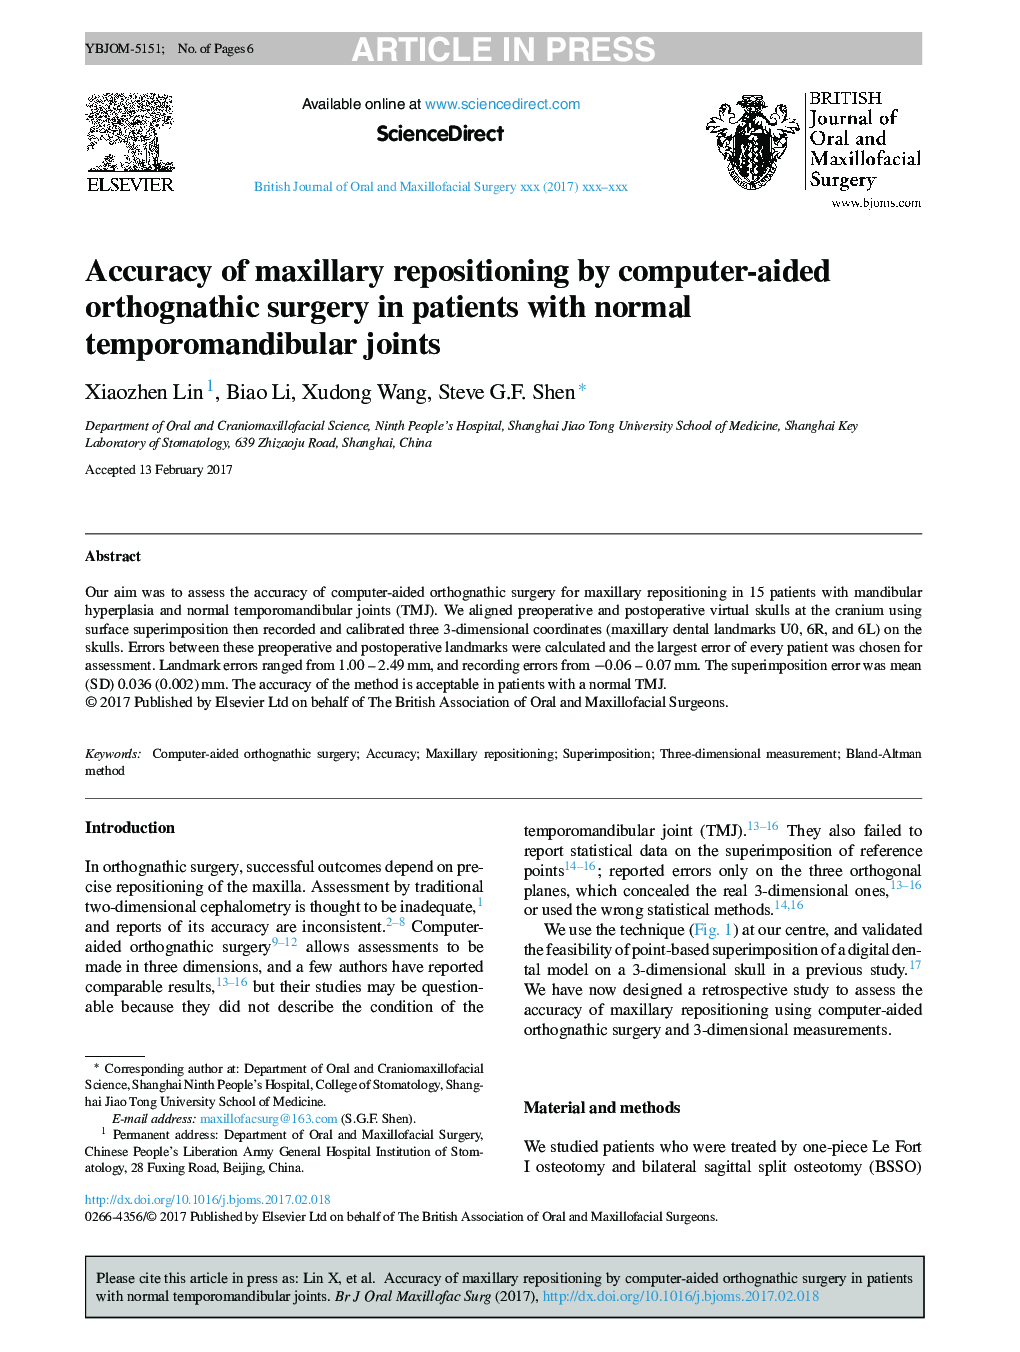 Accuracy of maxillary repositioning by computer-aided orthognathic surgery in patients with normal temporomandibular joints